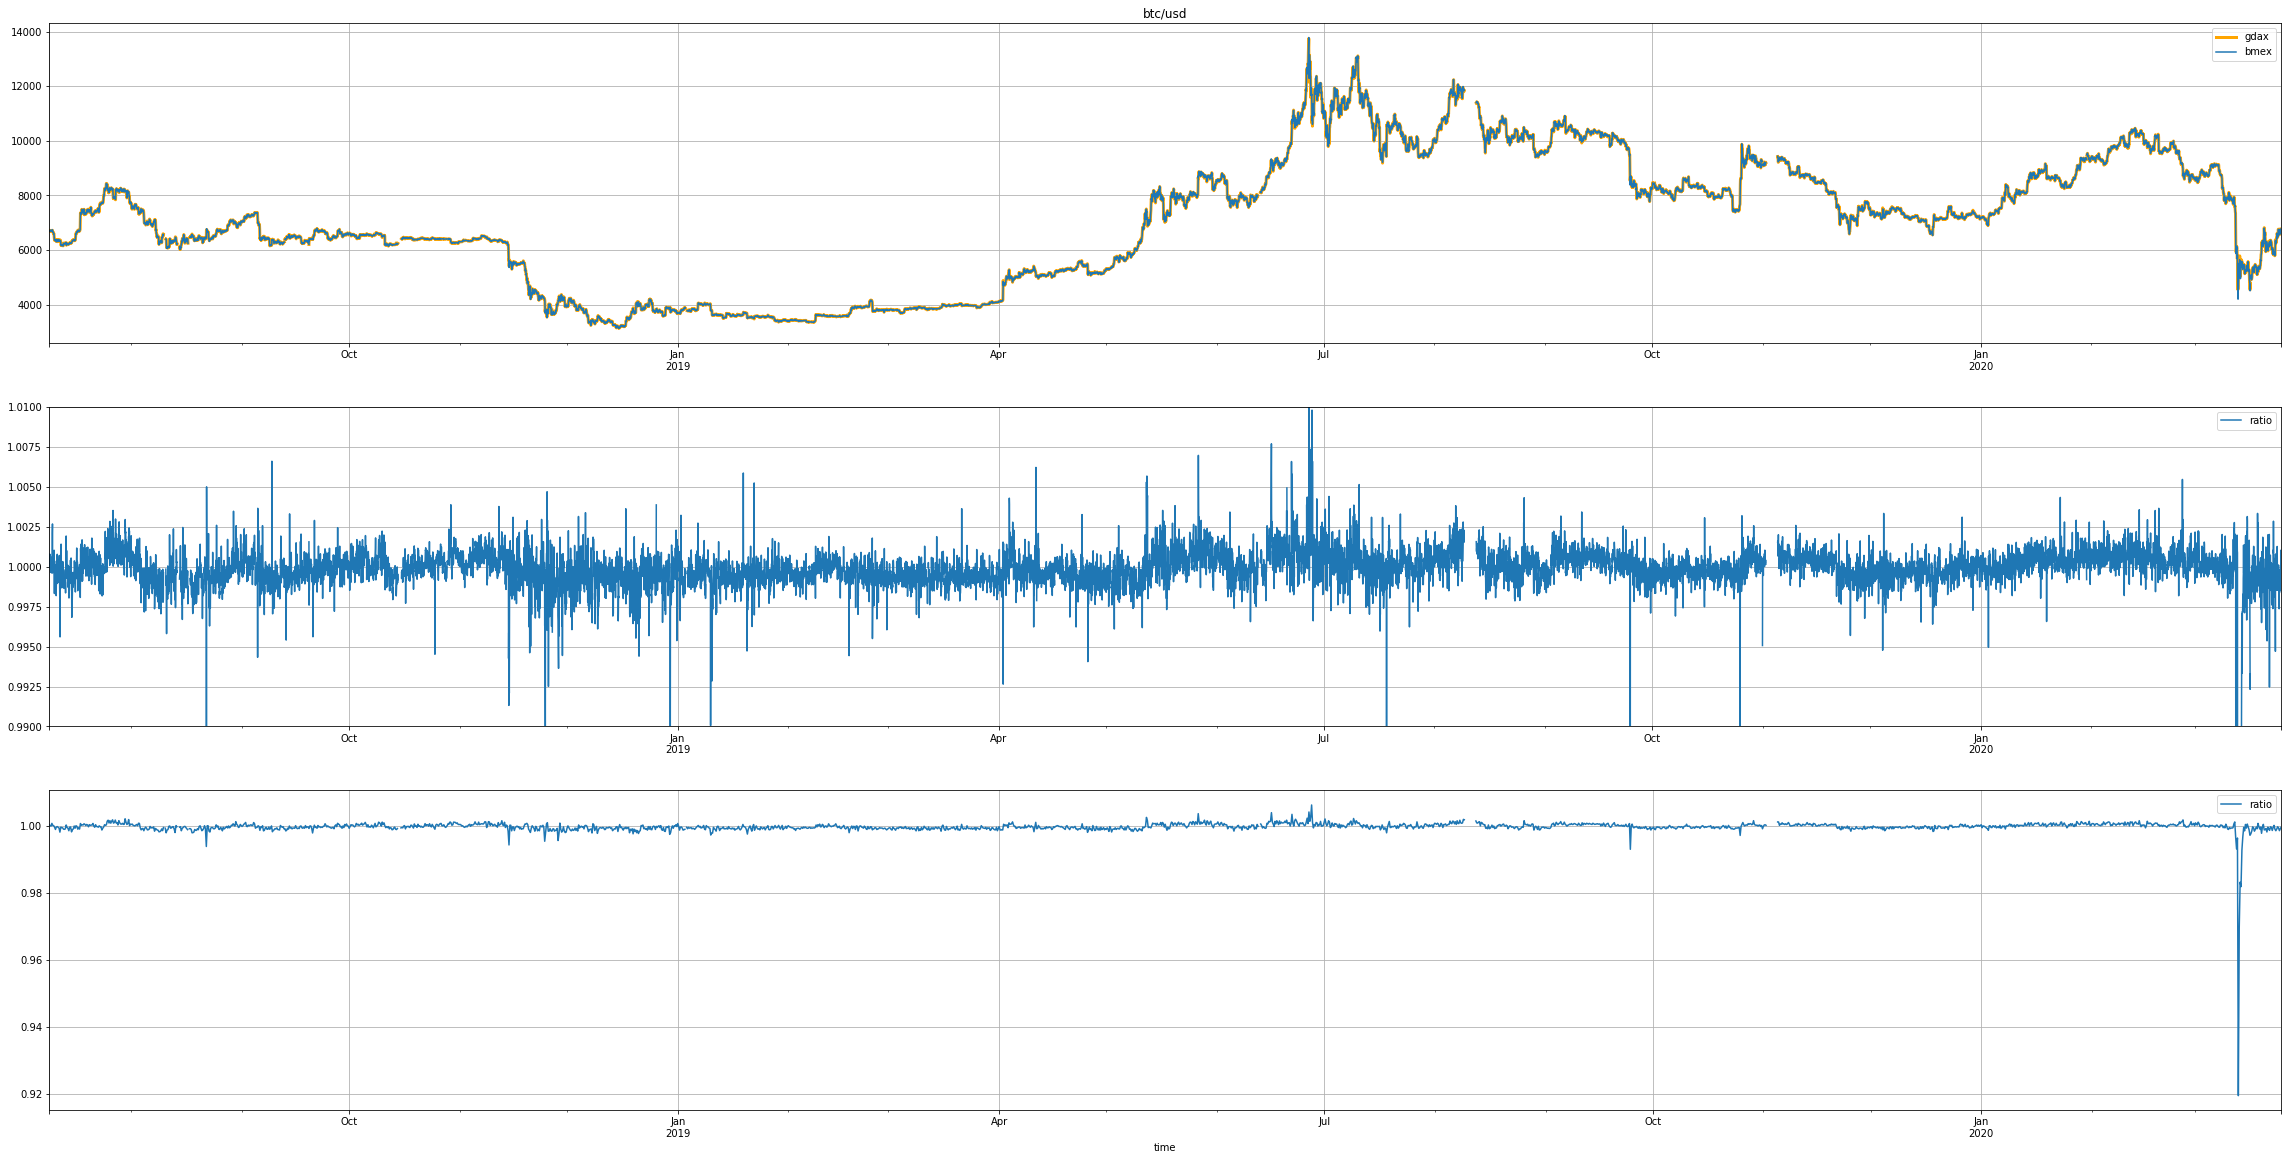 Time-series chart of the btc/usd price (top) and the bmex:gdax ratio (middle, bottom). The middle chart is a zoomed-in view, the bottom chart shows the very sharp plunge towards the end of the data.